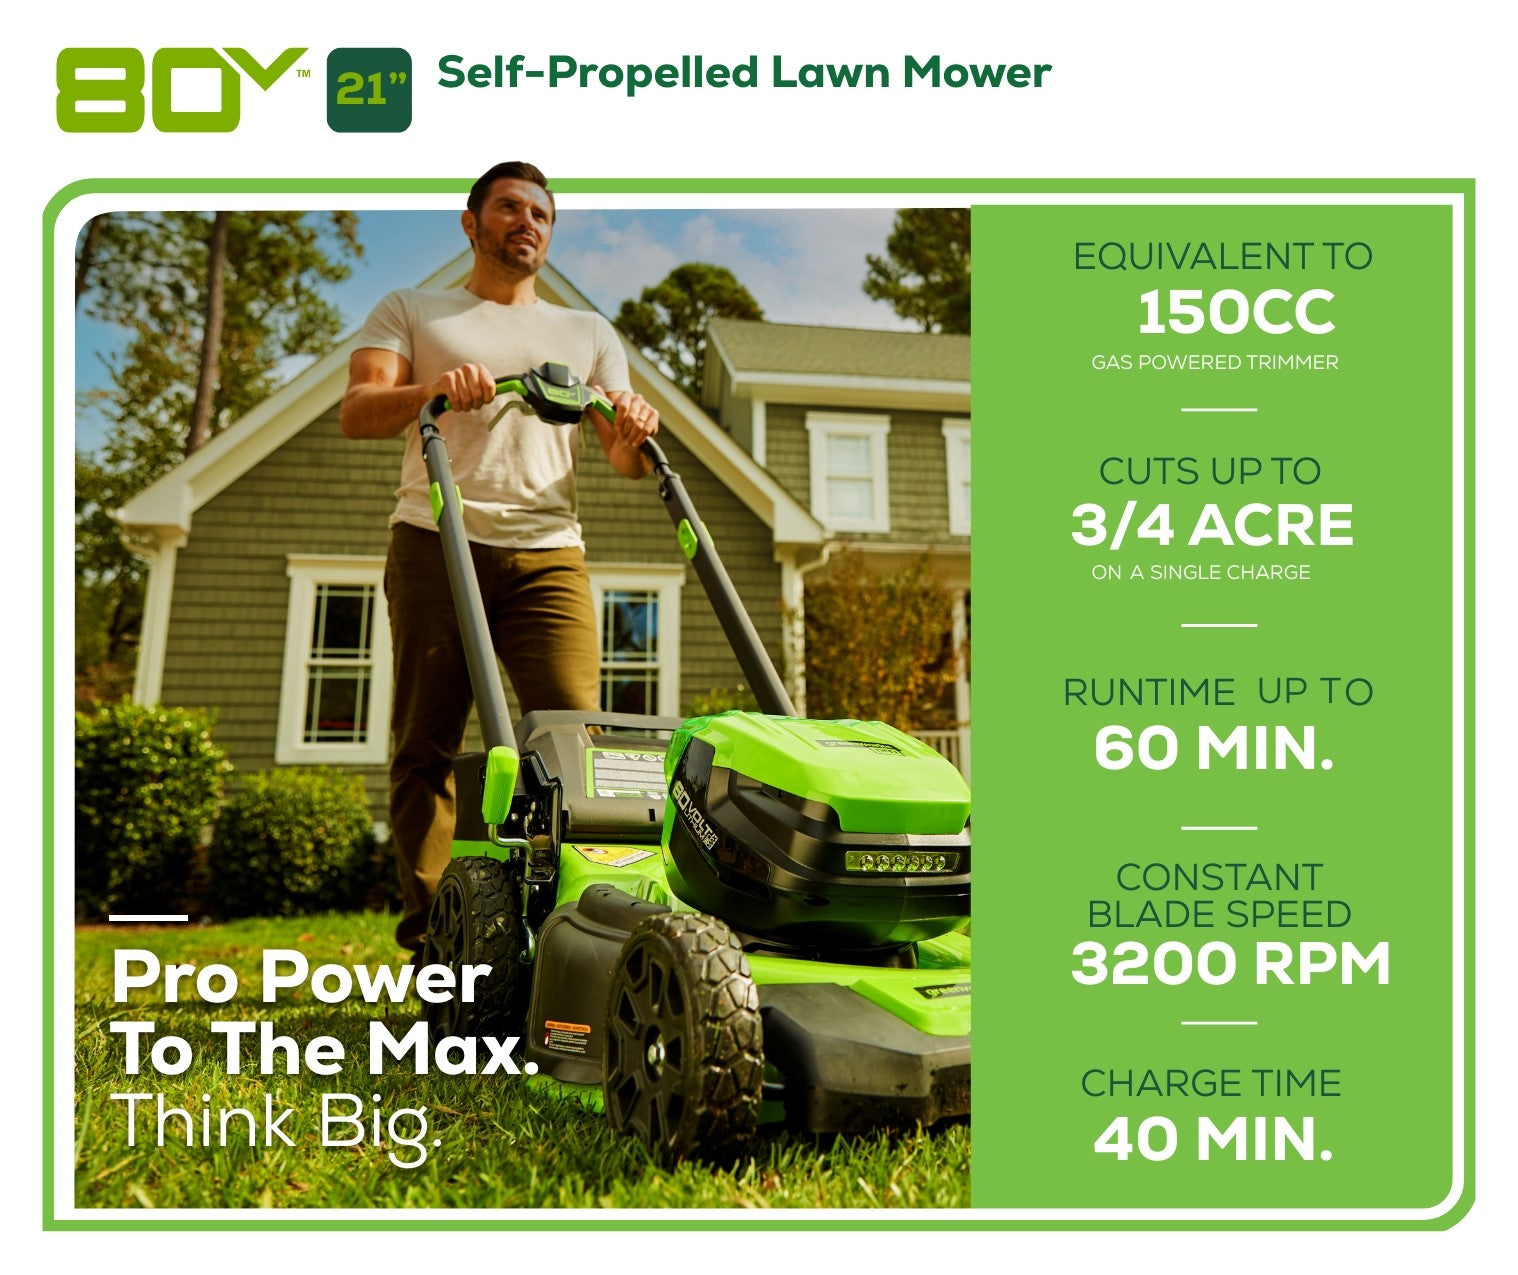 80V 21" Cordless Battery Self-Propelled Lawn Mower w/ 5.0Ah Battery & Rapid Charger